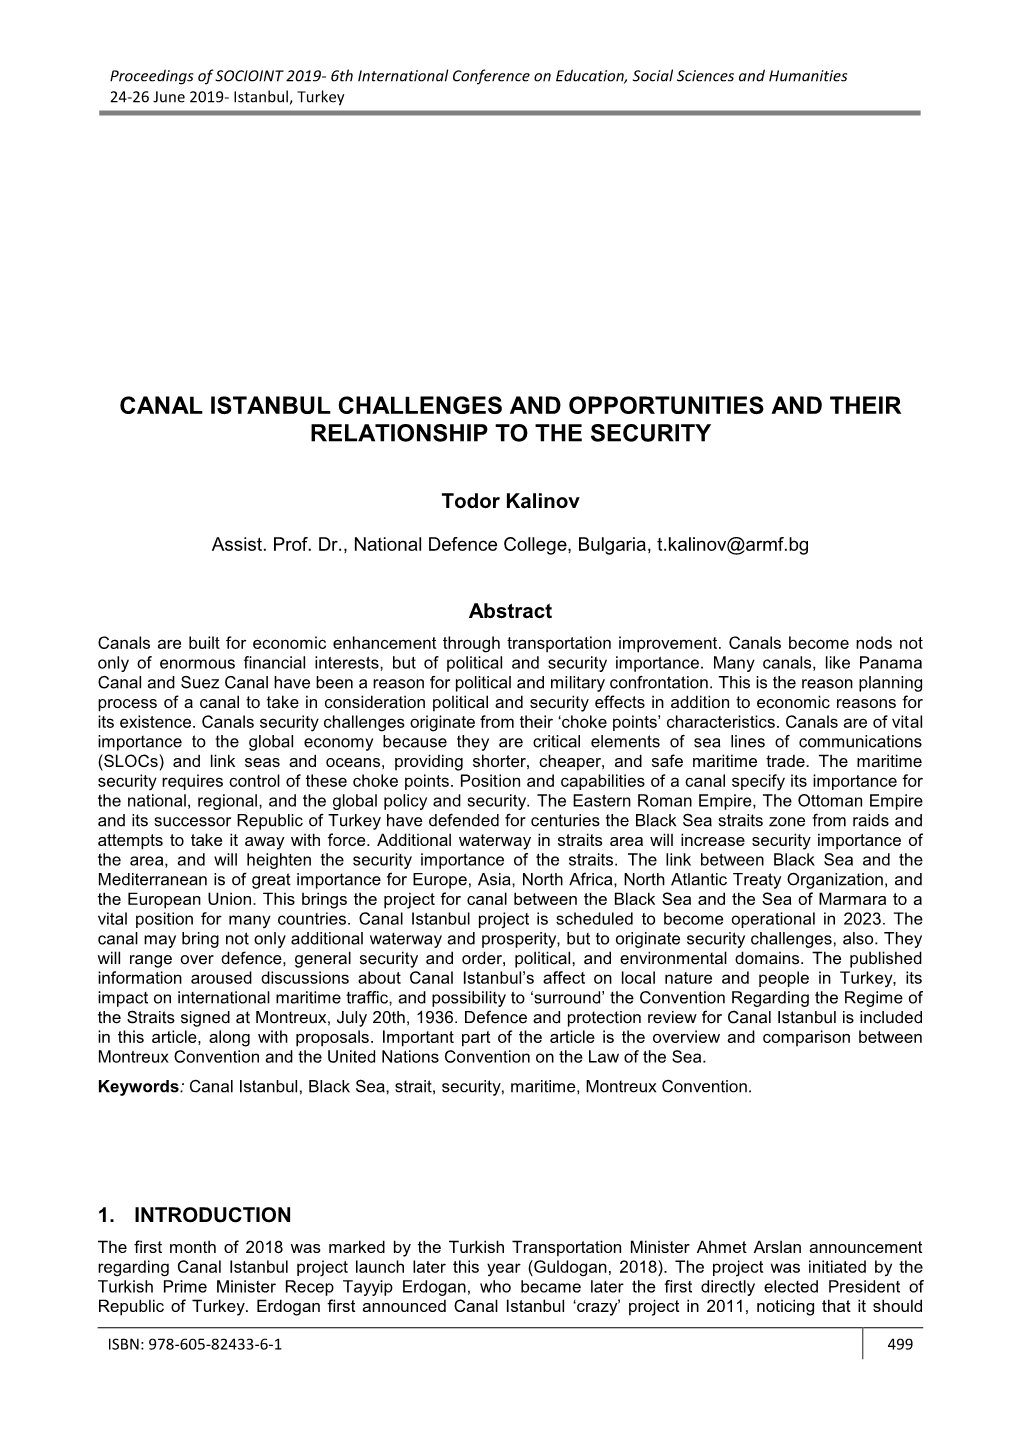 Canal Istanbul Challenges and Opportunities and Their Relationship to the Security